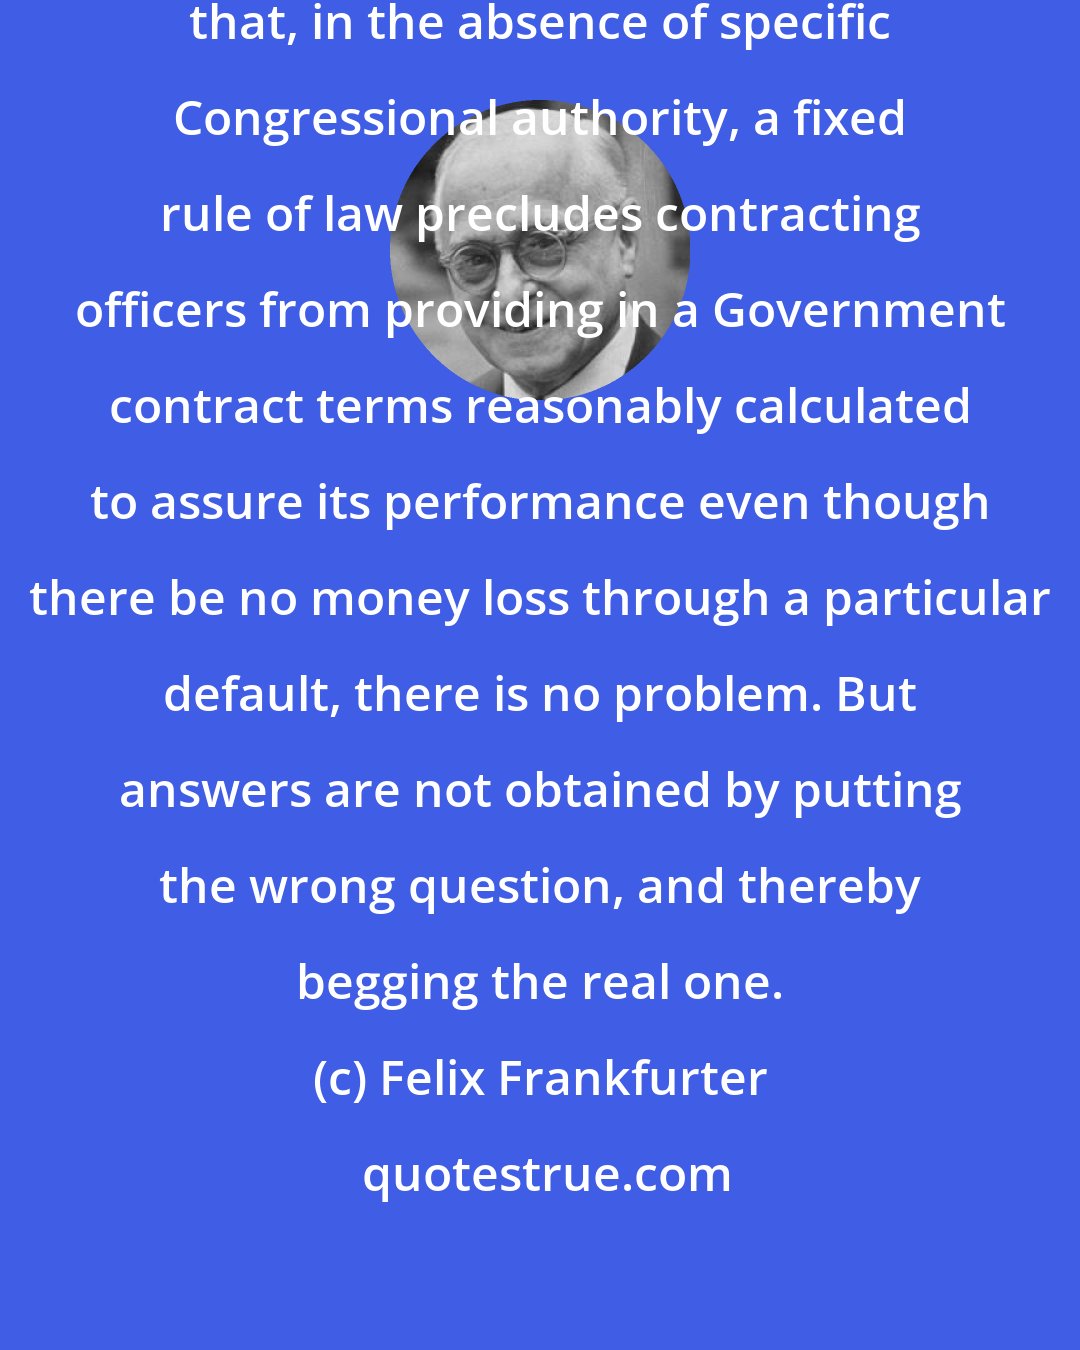 Felix Frankfurter: If one starts with the assumption that, in the absence of specific Congressional authority, a fixed rule of law precludes contracting officers from providing in a Government contract terms reasonably calculated to assure its performance even though there be no money loss through a particular default, there is no problem. But answers are not obtained by putting the wrong question, and thereby begging the real one.